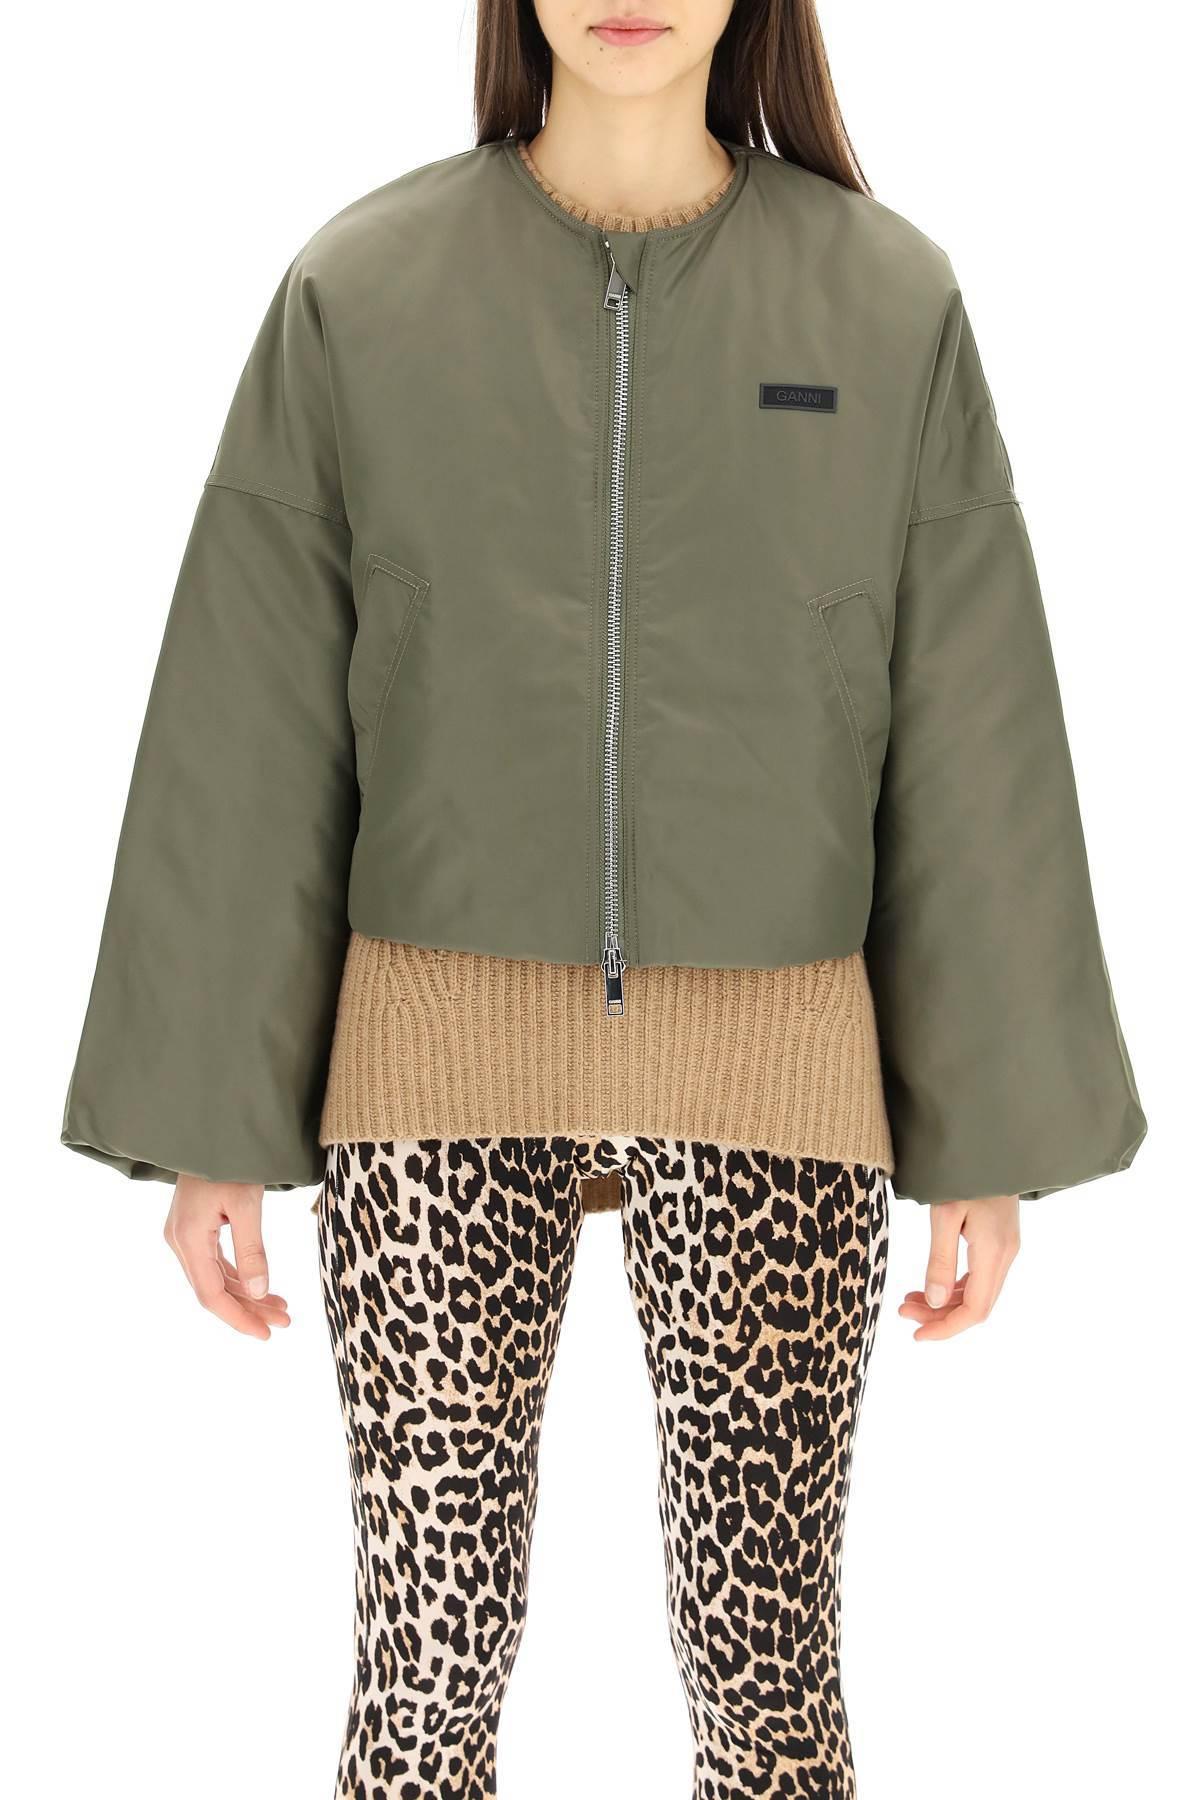 Ganni Synthetic Cropped Bomber Jacket in Khaki (Green) - Lyst